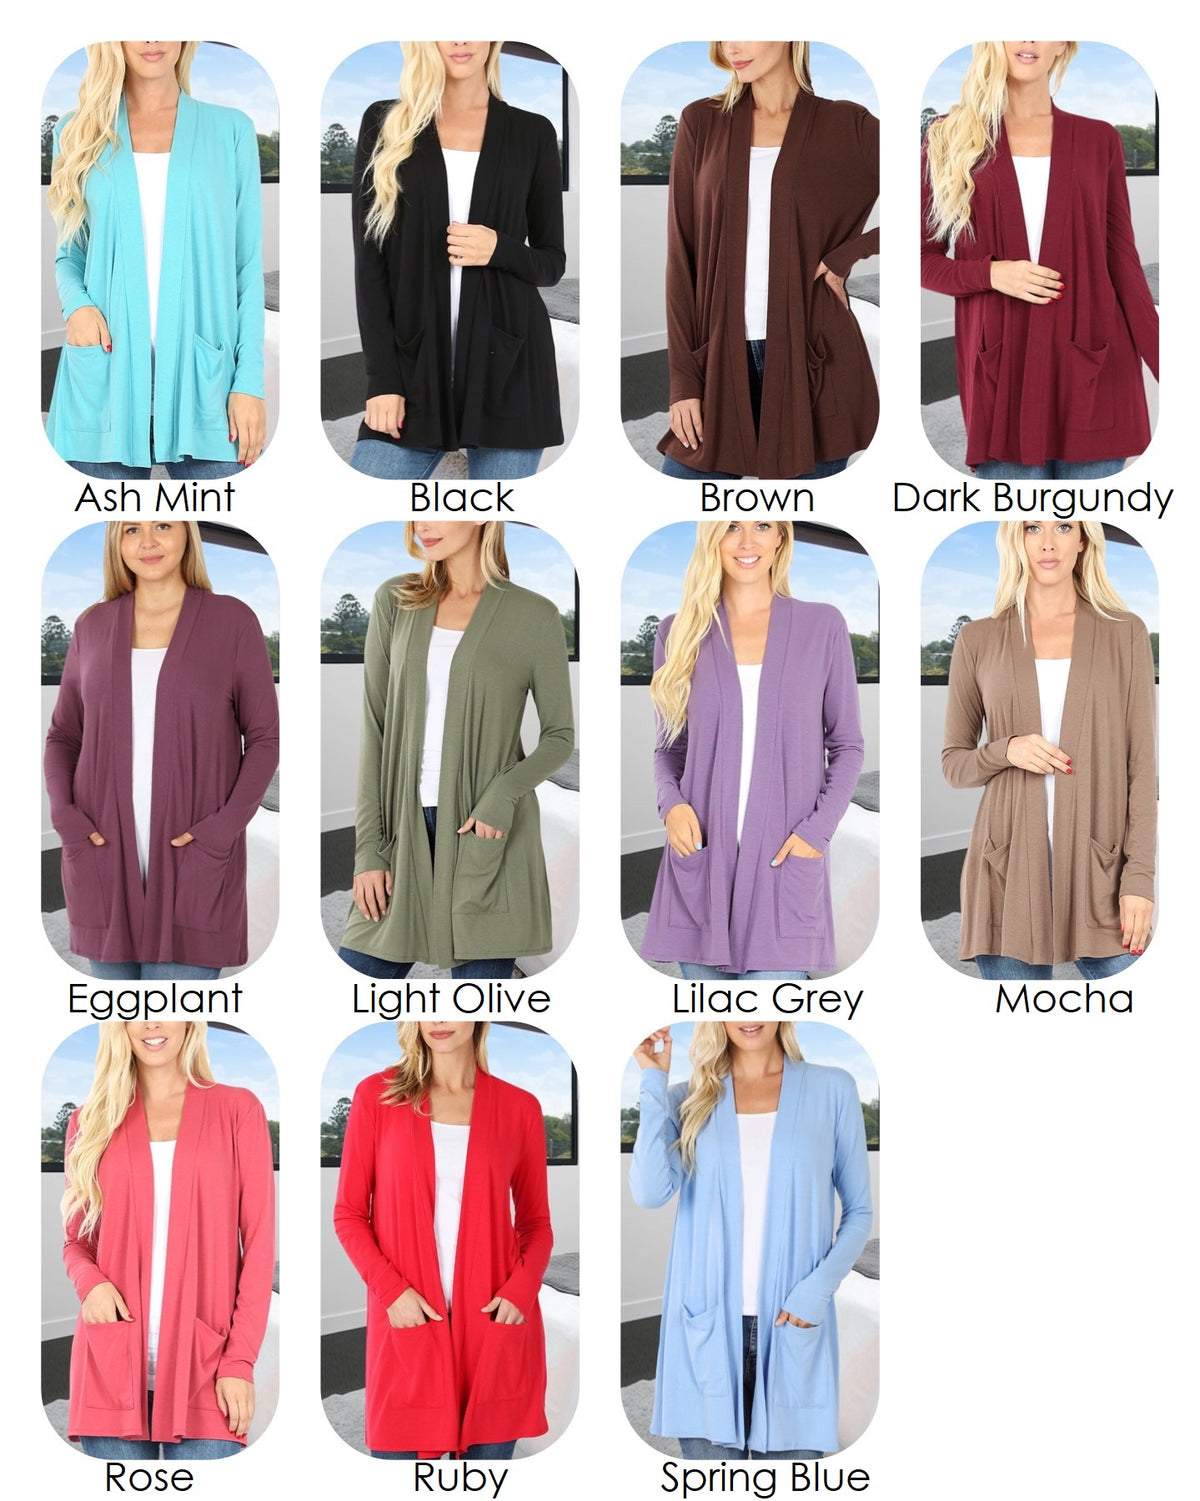 11 Color Options Available in the Carmine Women's & Junior's Long Sleeve Cardigan with Pockets in sizes Small-3XL Regular and Plus Sizing